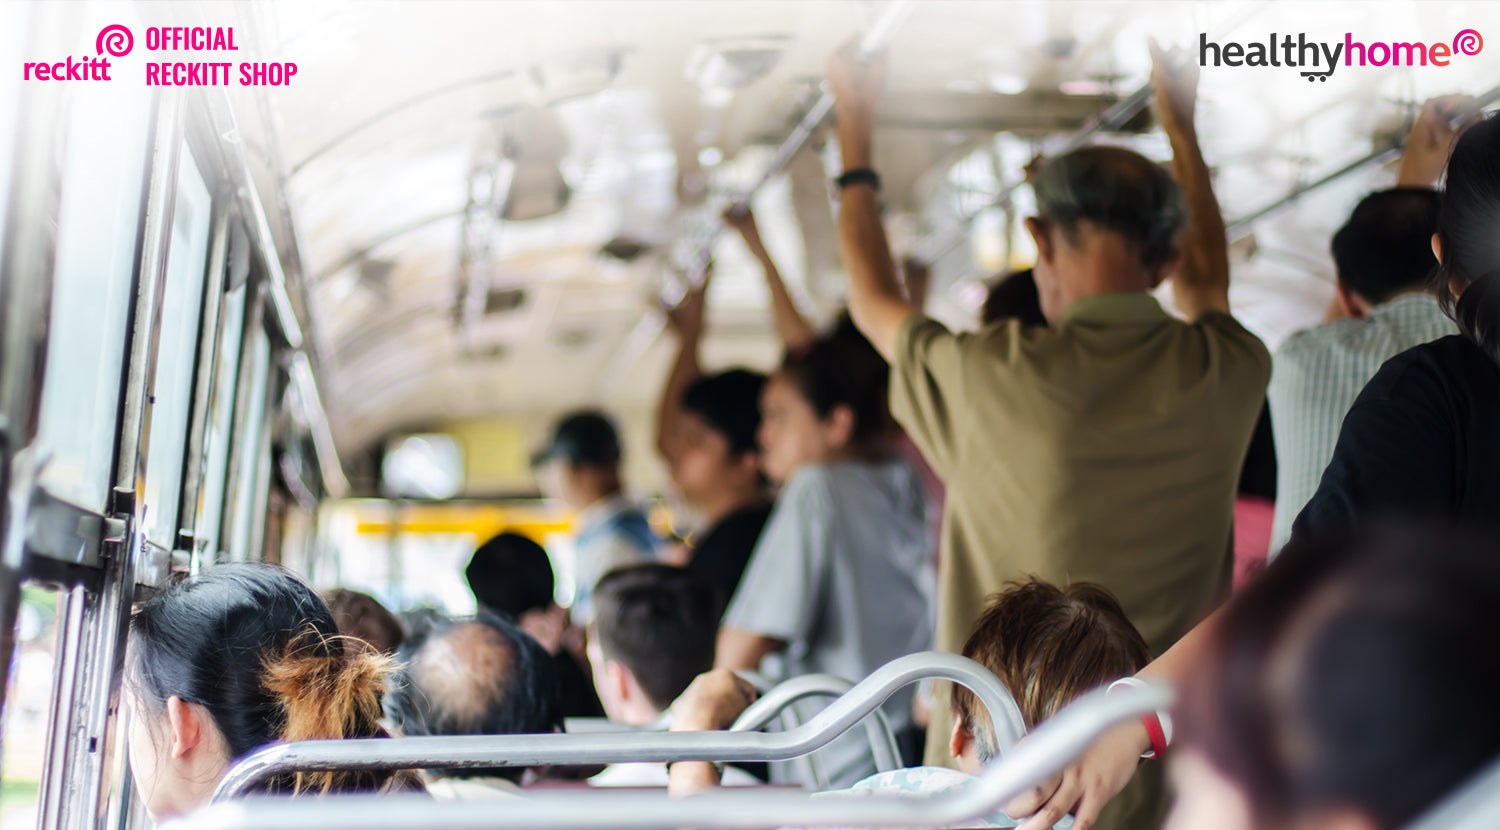 Safety & Hygiene Tips to Follow While Using Public Transport